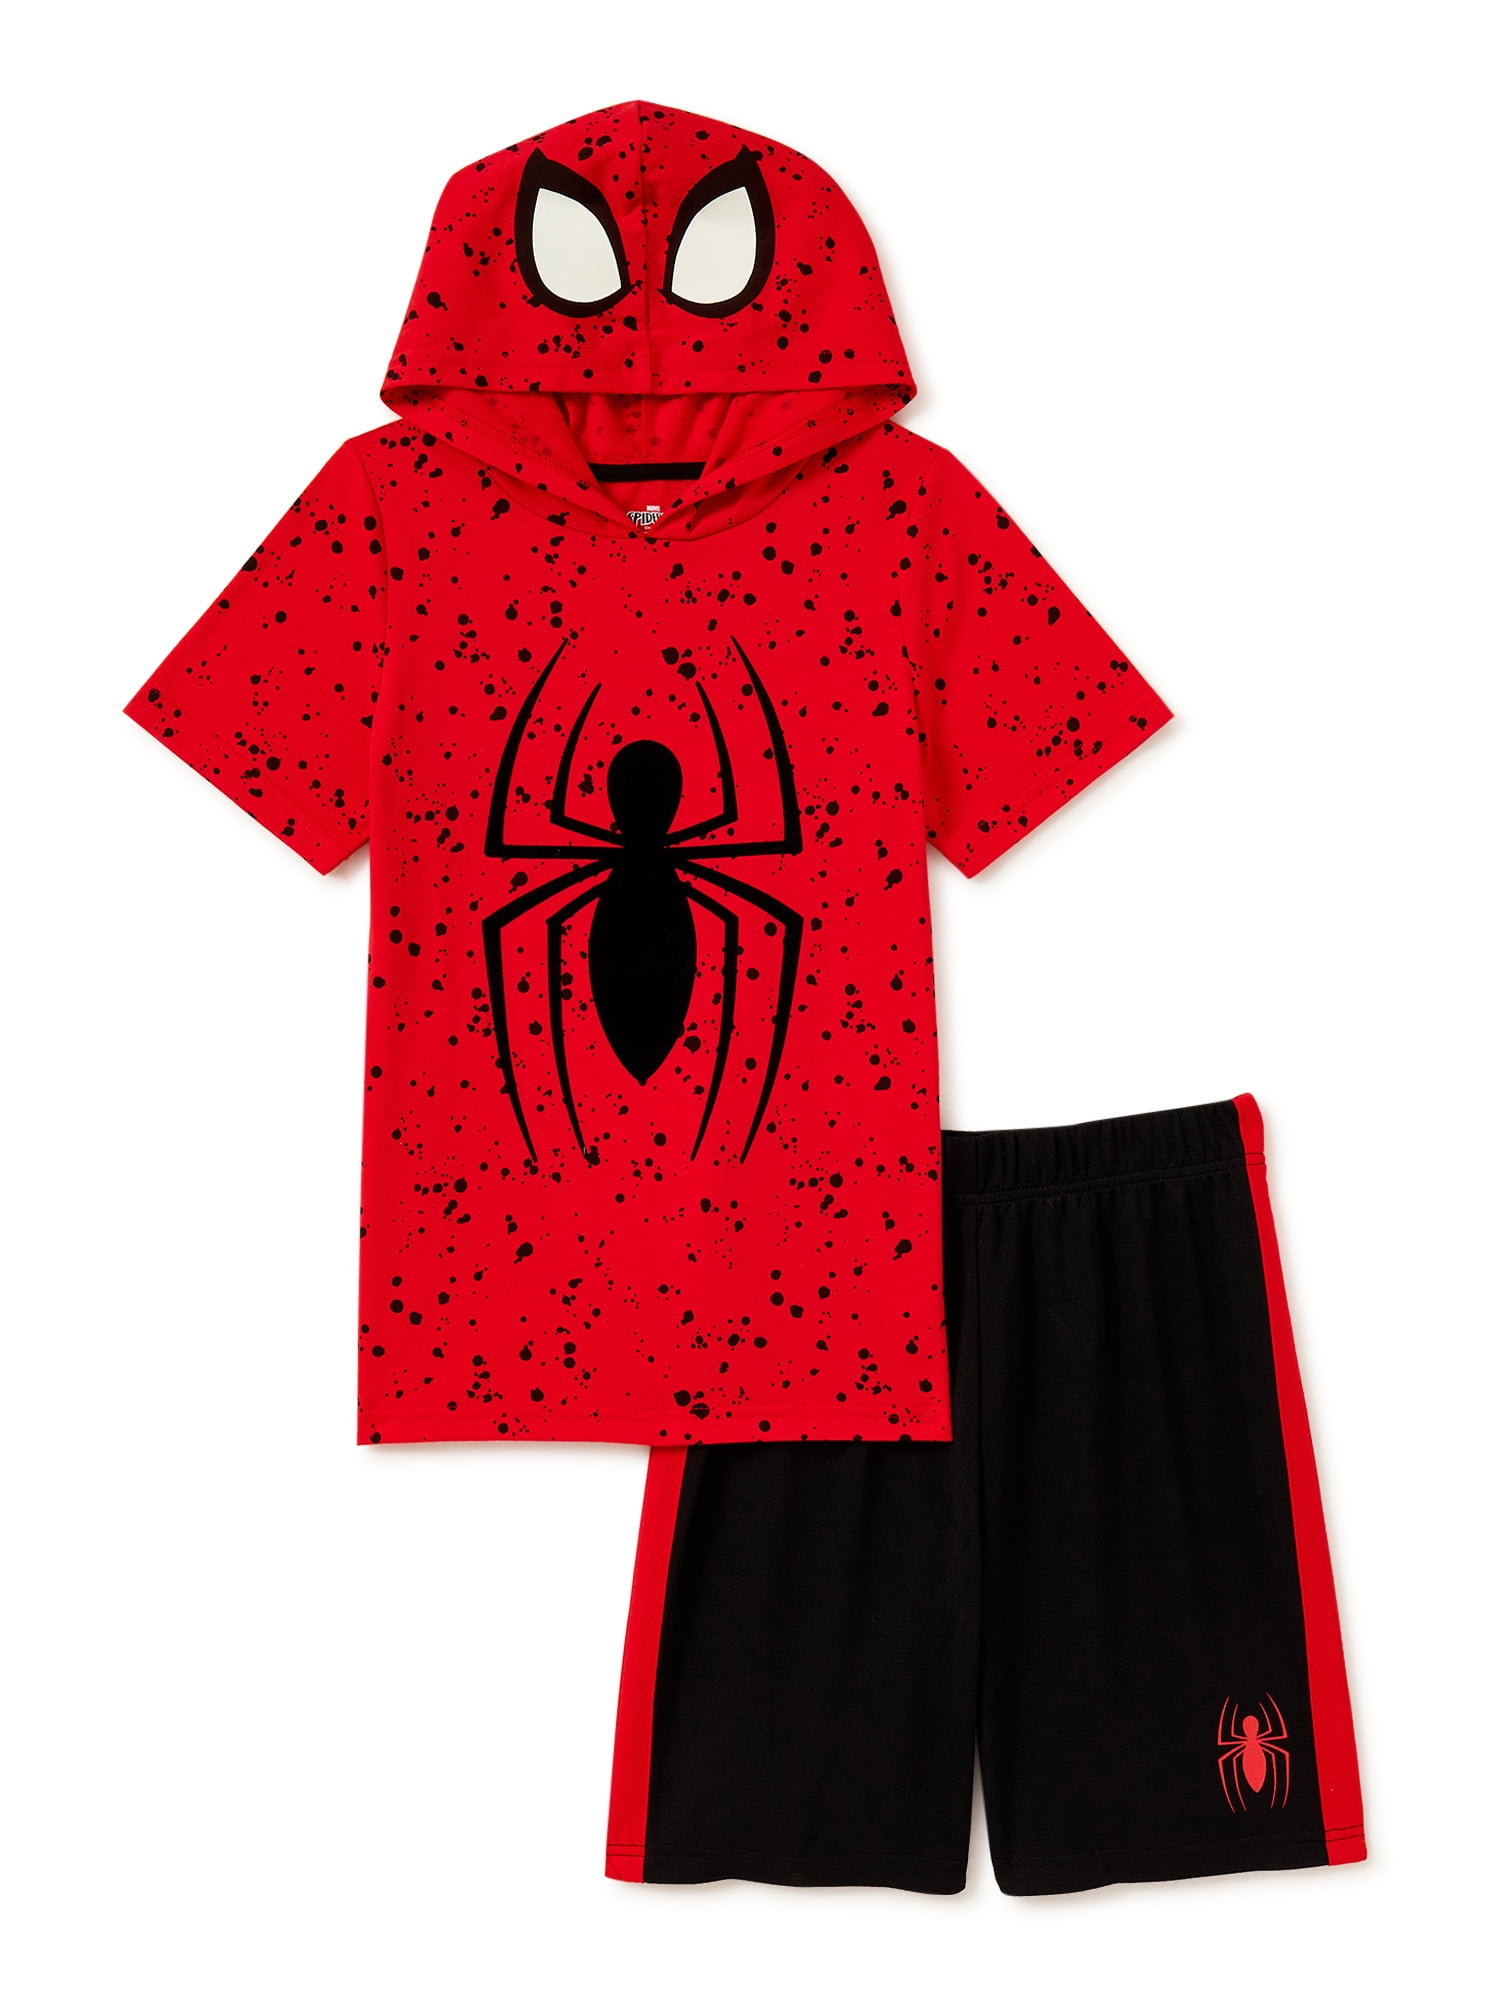 New   Boys 4T  2 Piece Spiderman Set Sweat Shirt and Pants  Let's Hang 